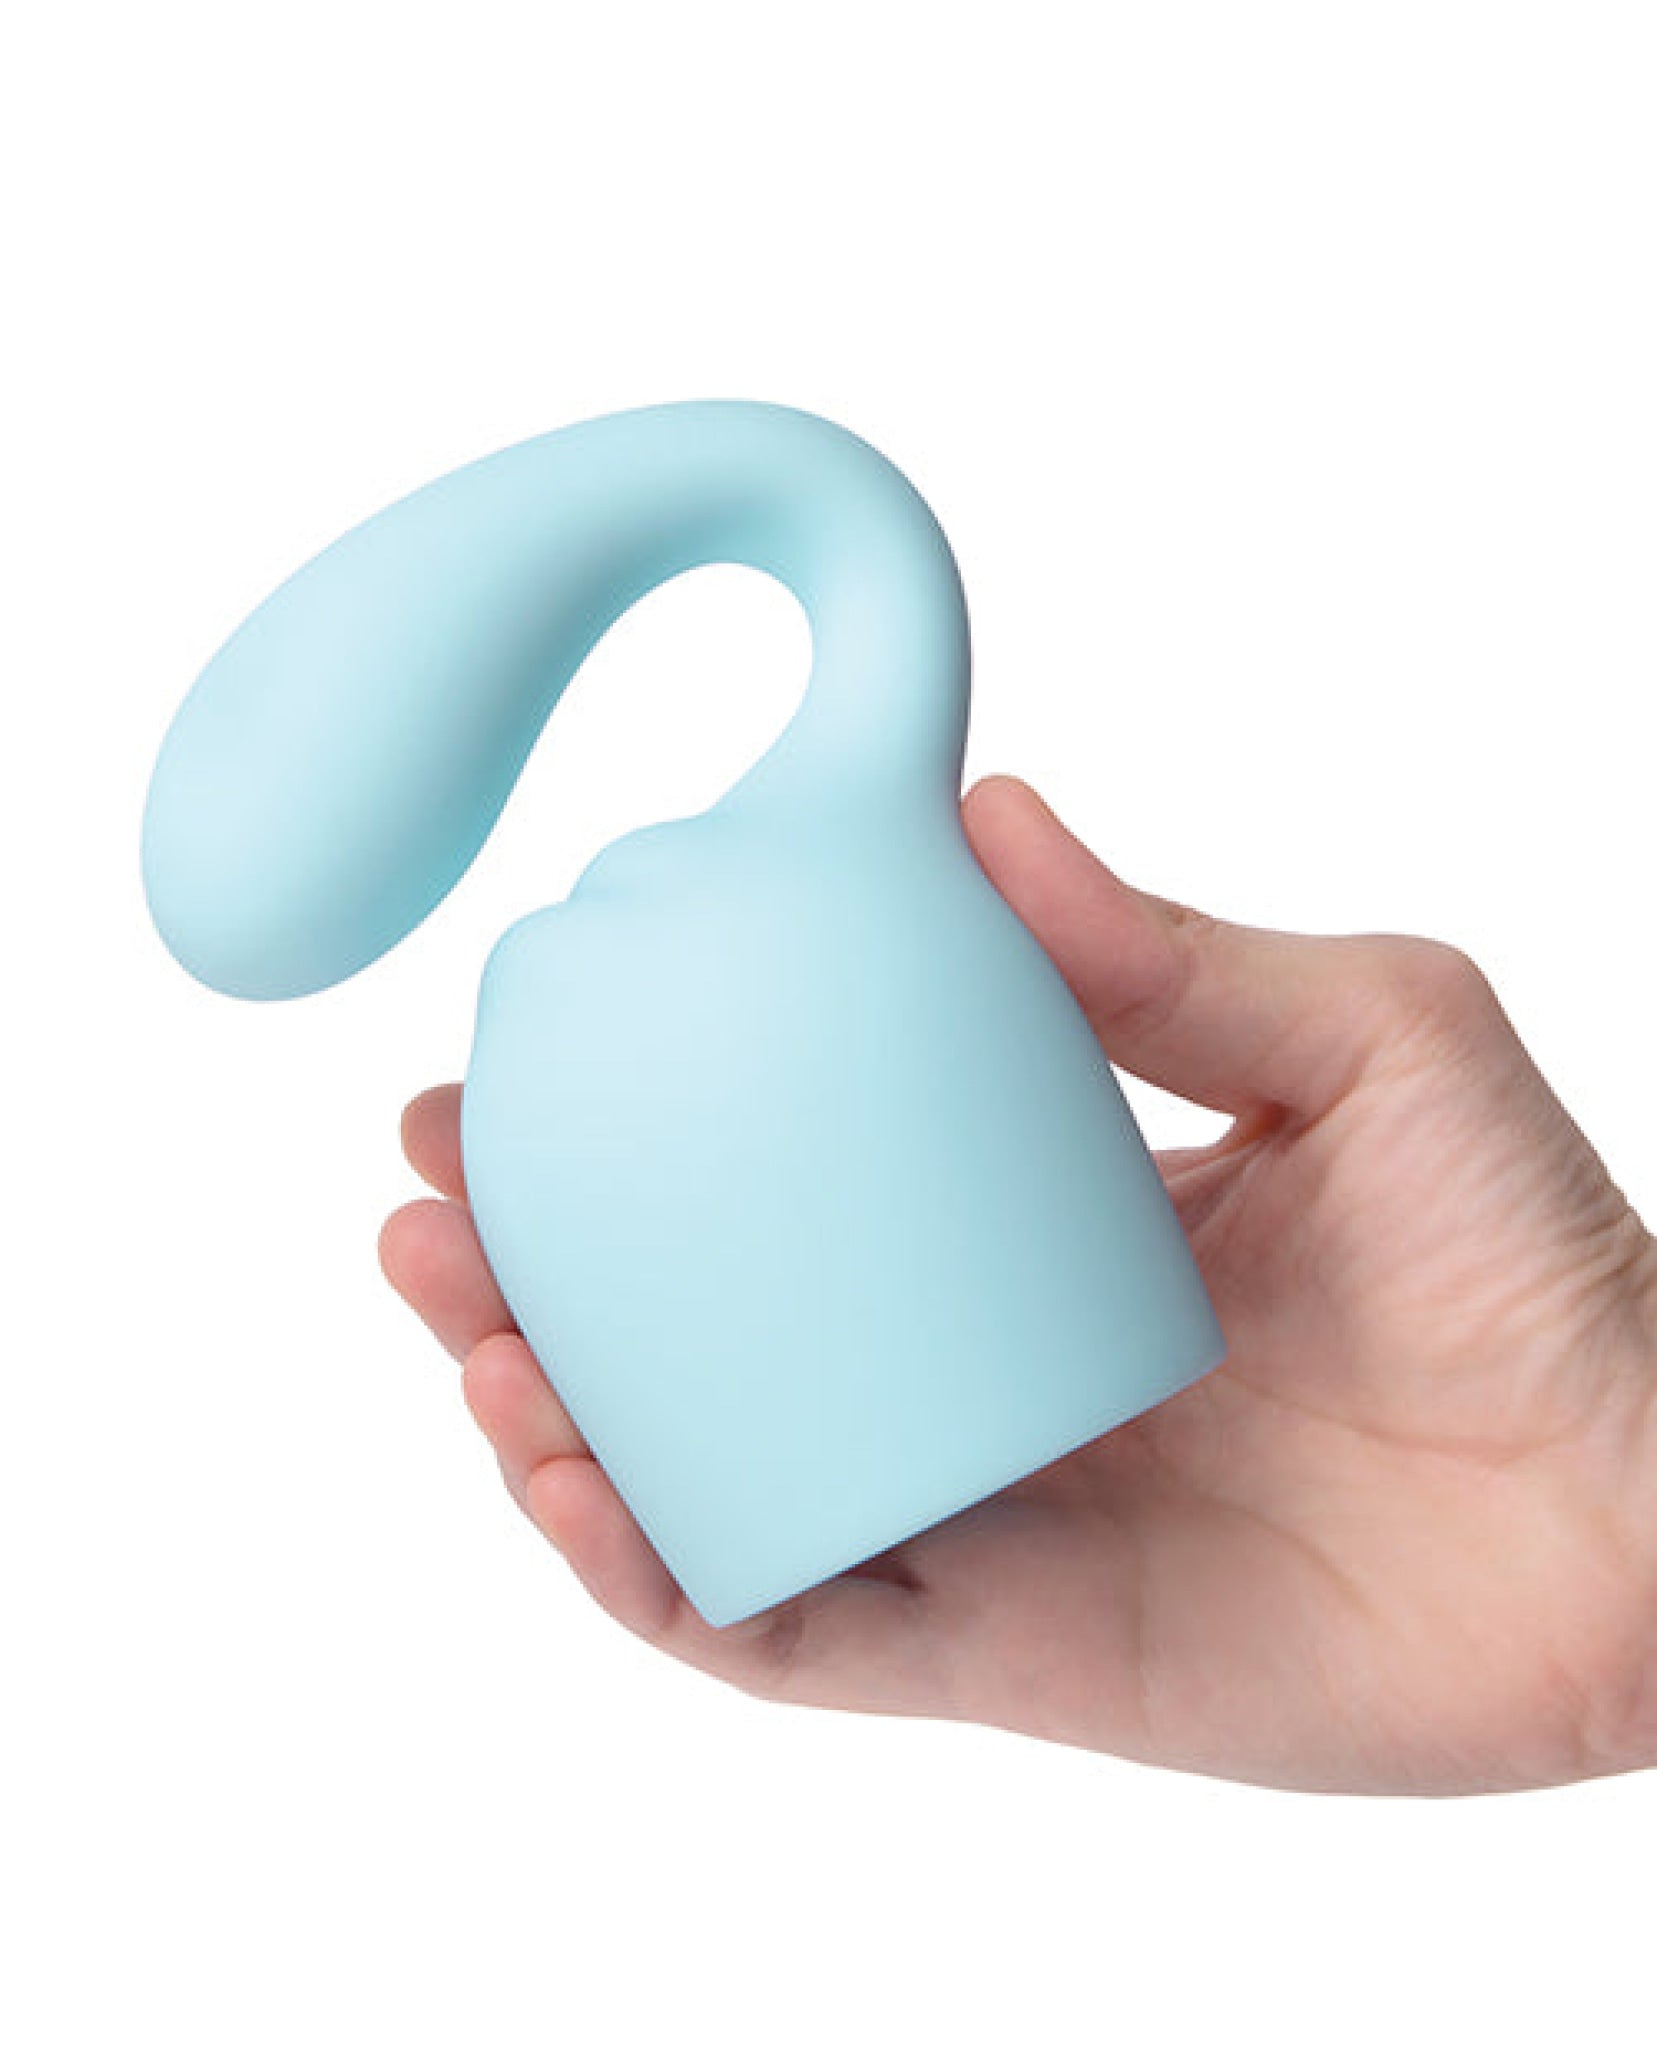 Le Wand Glider Weighted Silicone Attachment Le Wand